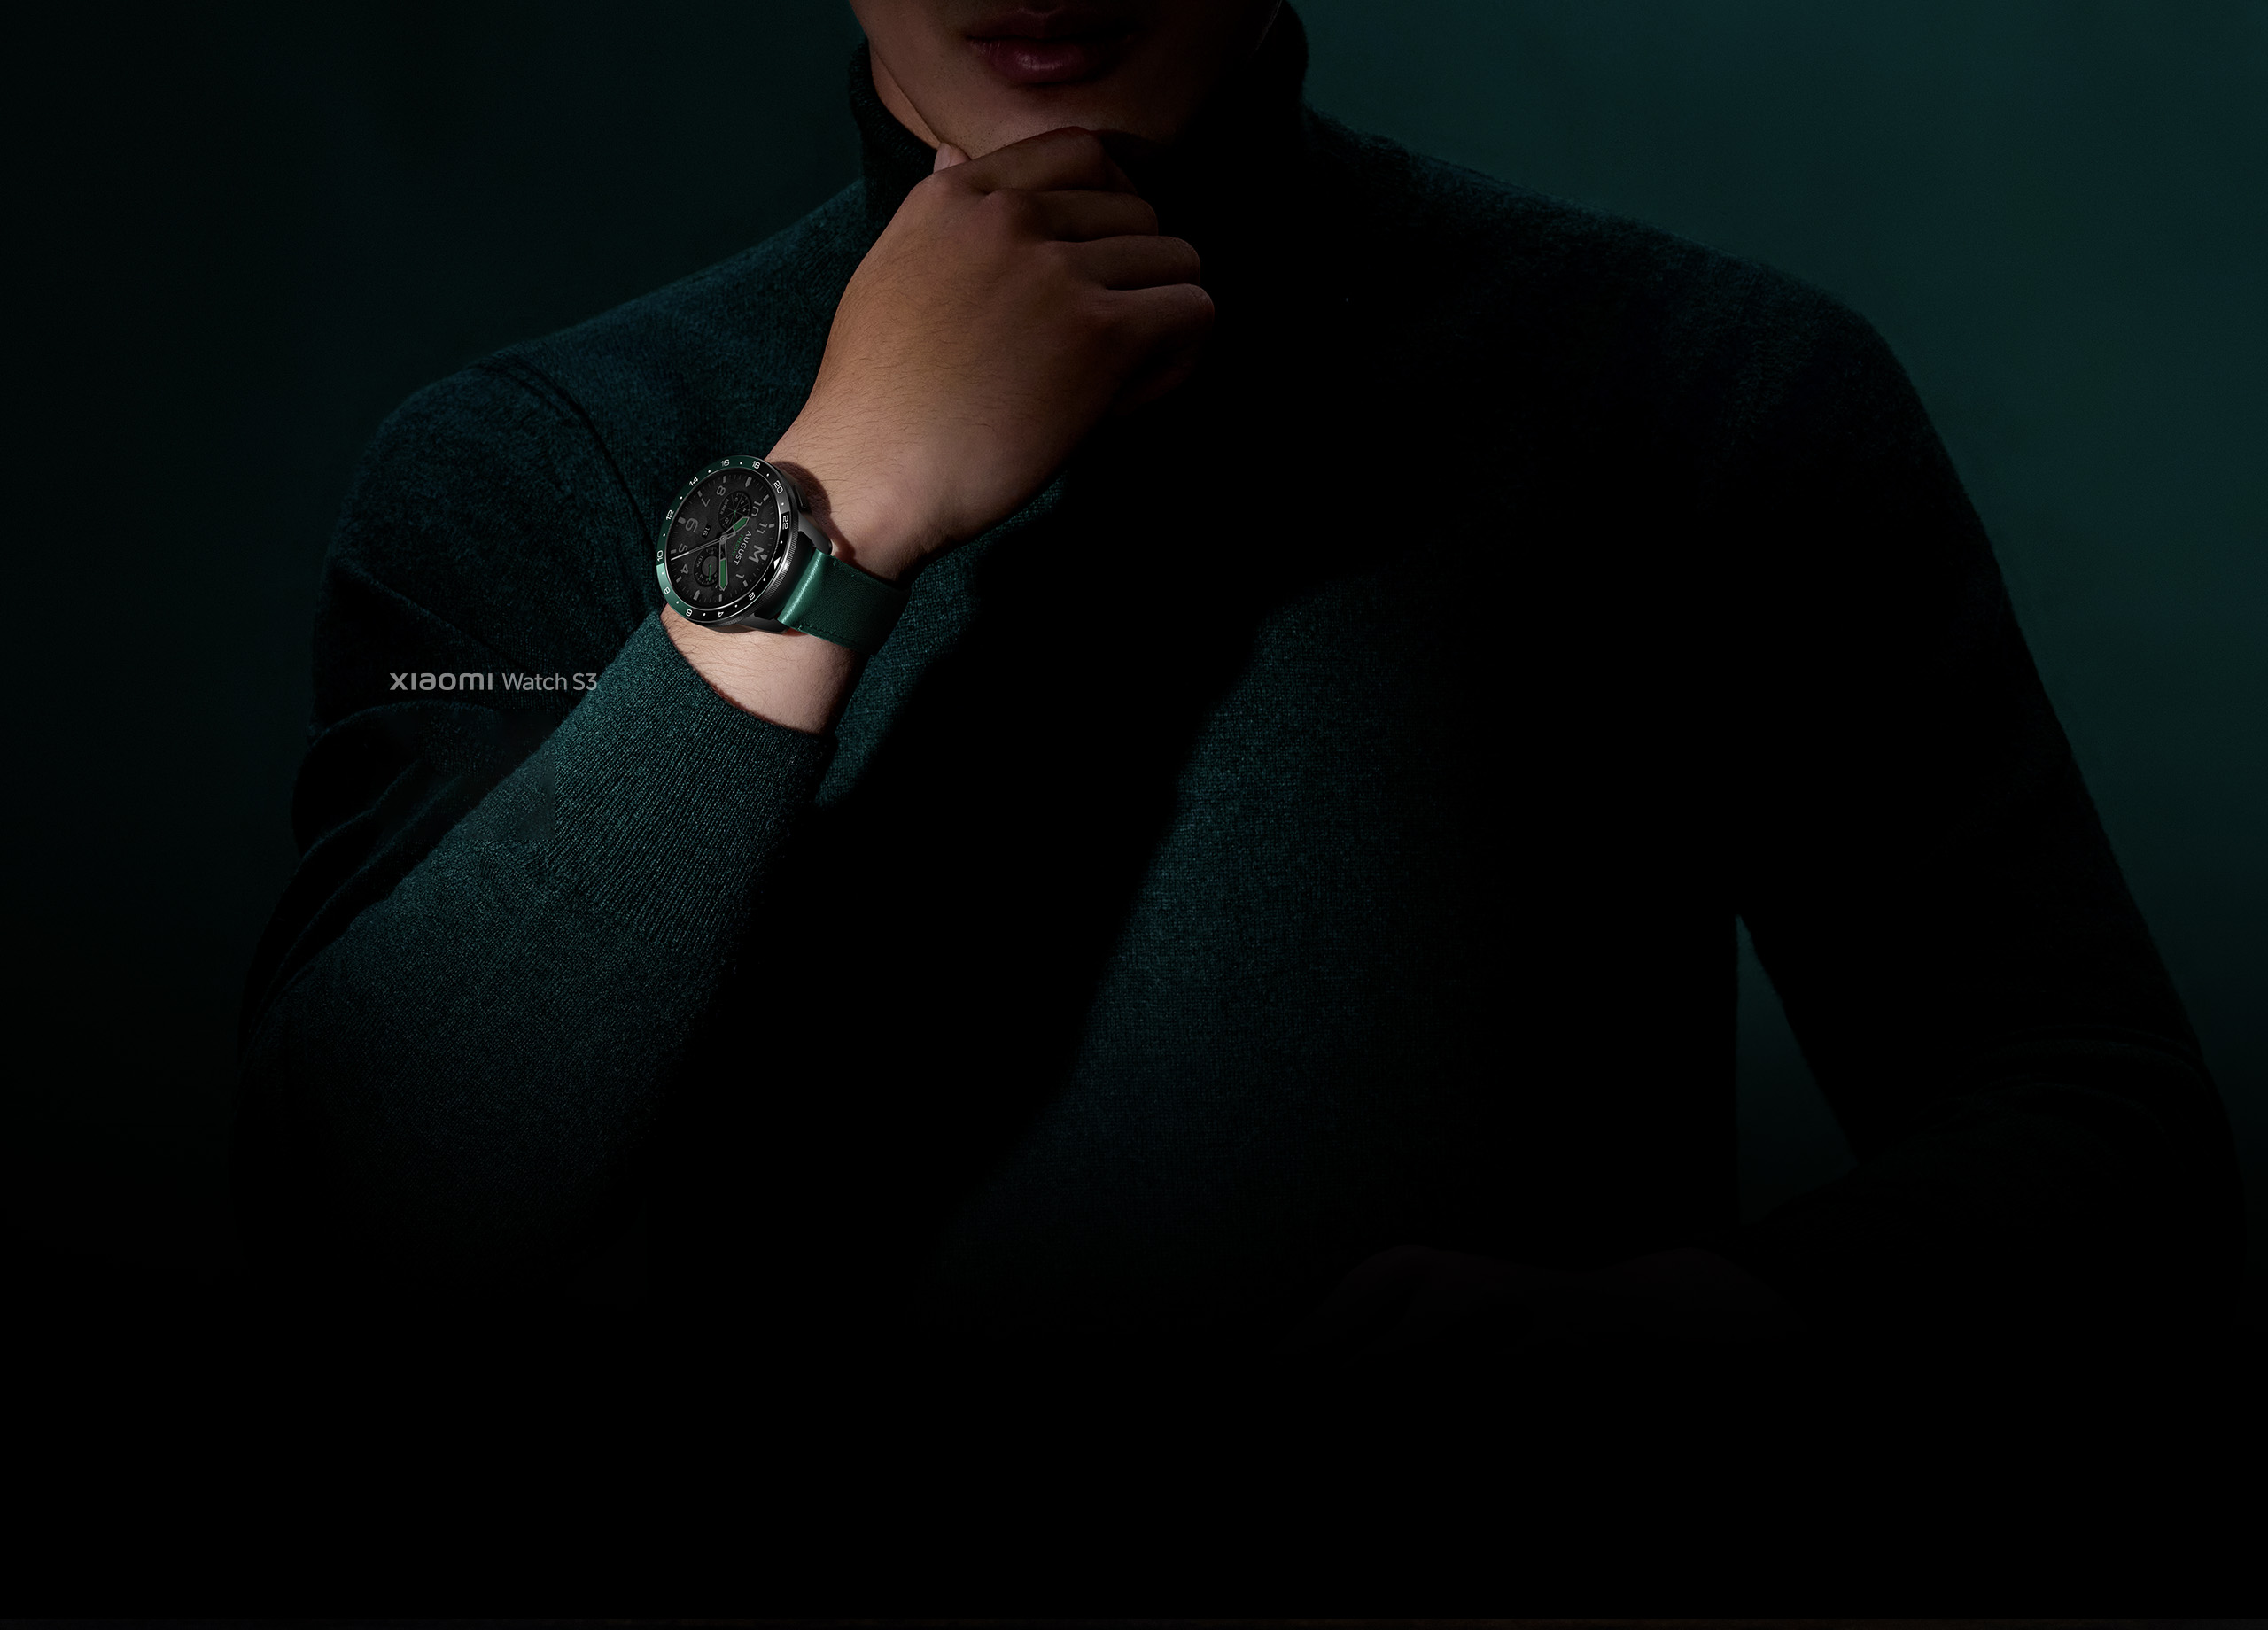 Xiaomi Watch S3 smartwatch with interchangeable bezels, eSMI support  launched - Times of India